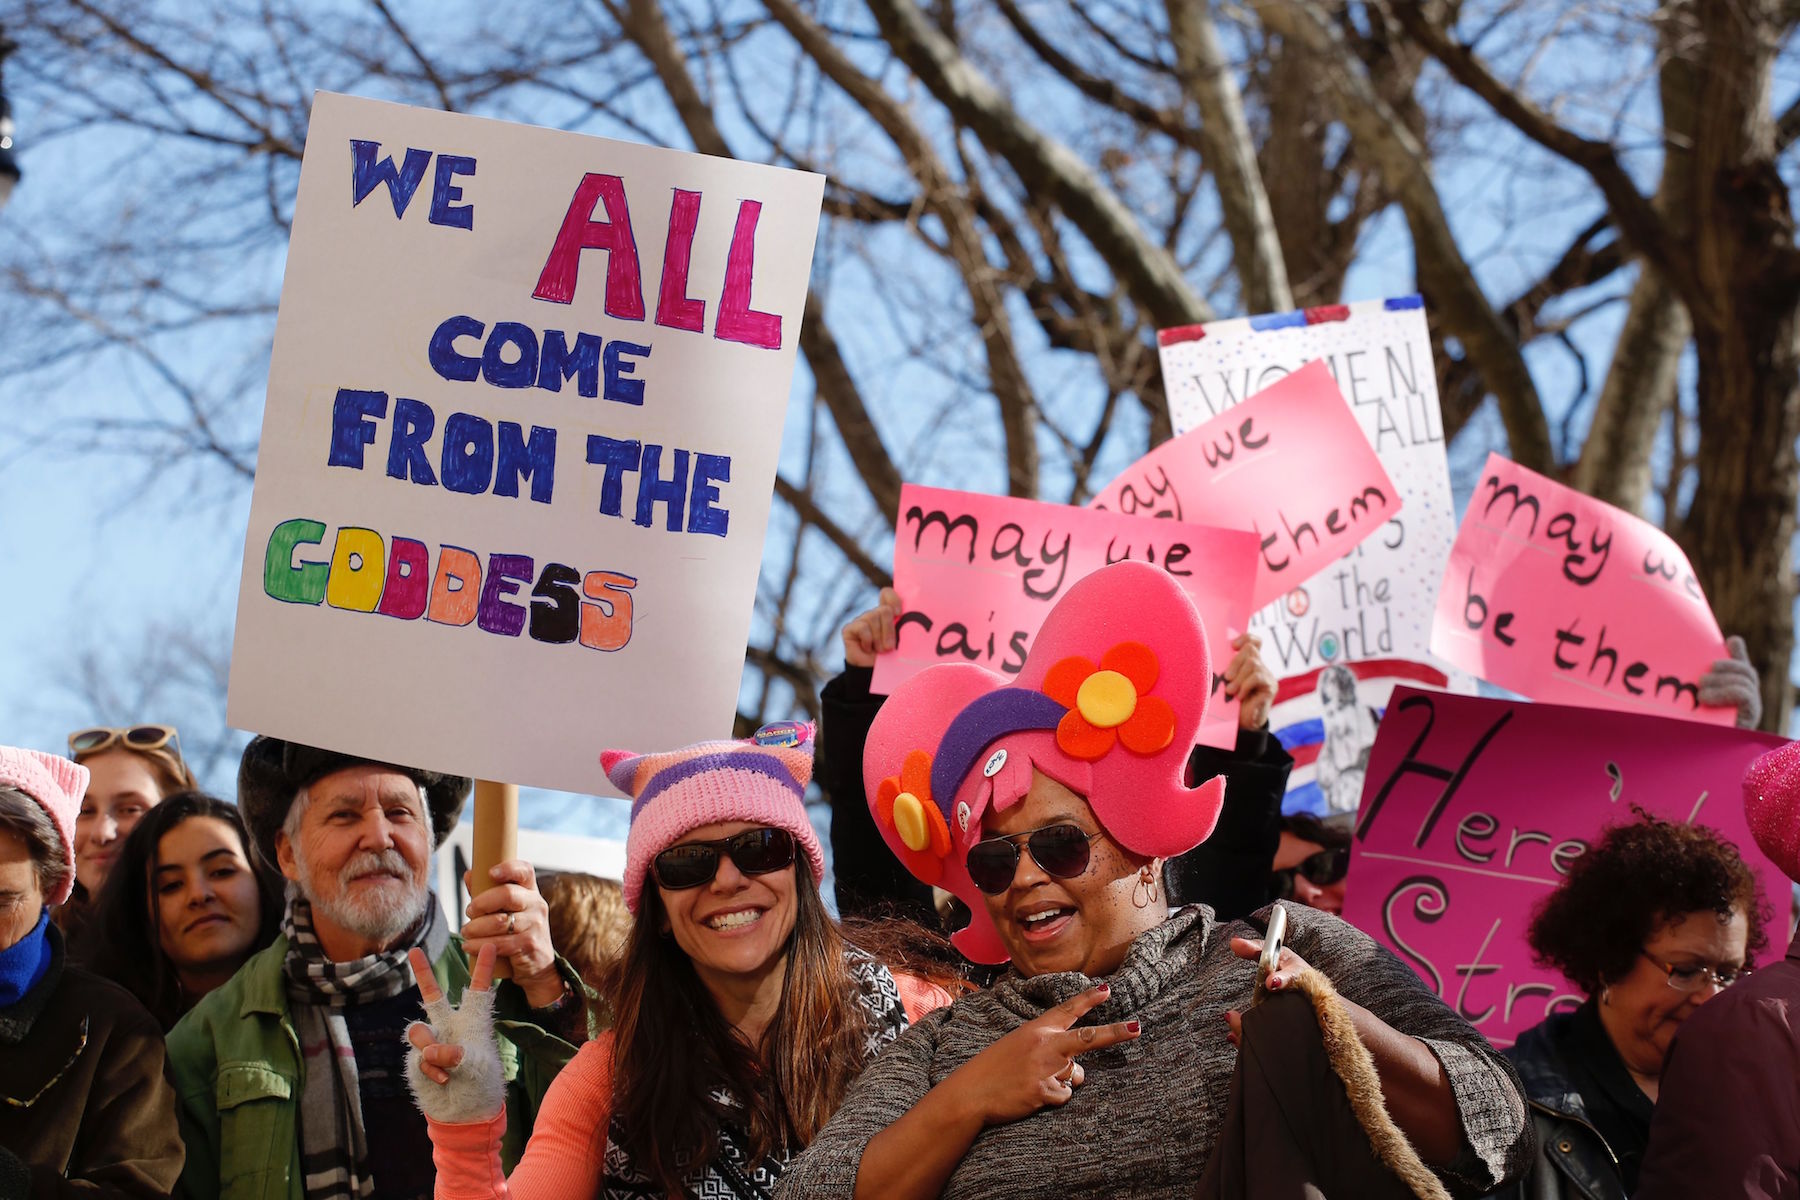 About 300K attend 2nd Women's March Chicago, exceeding last year, organizers say ...1800 x 1200